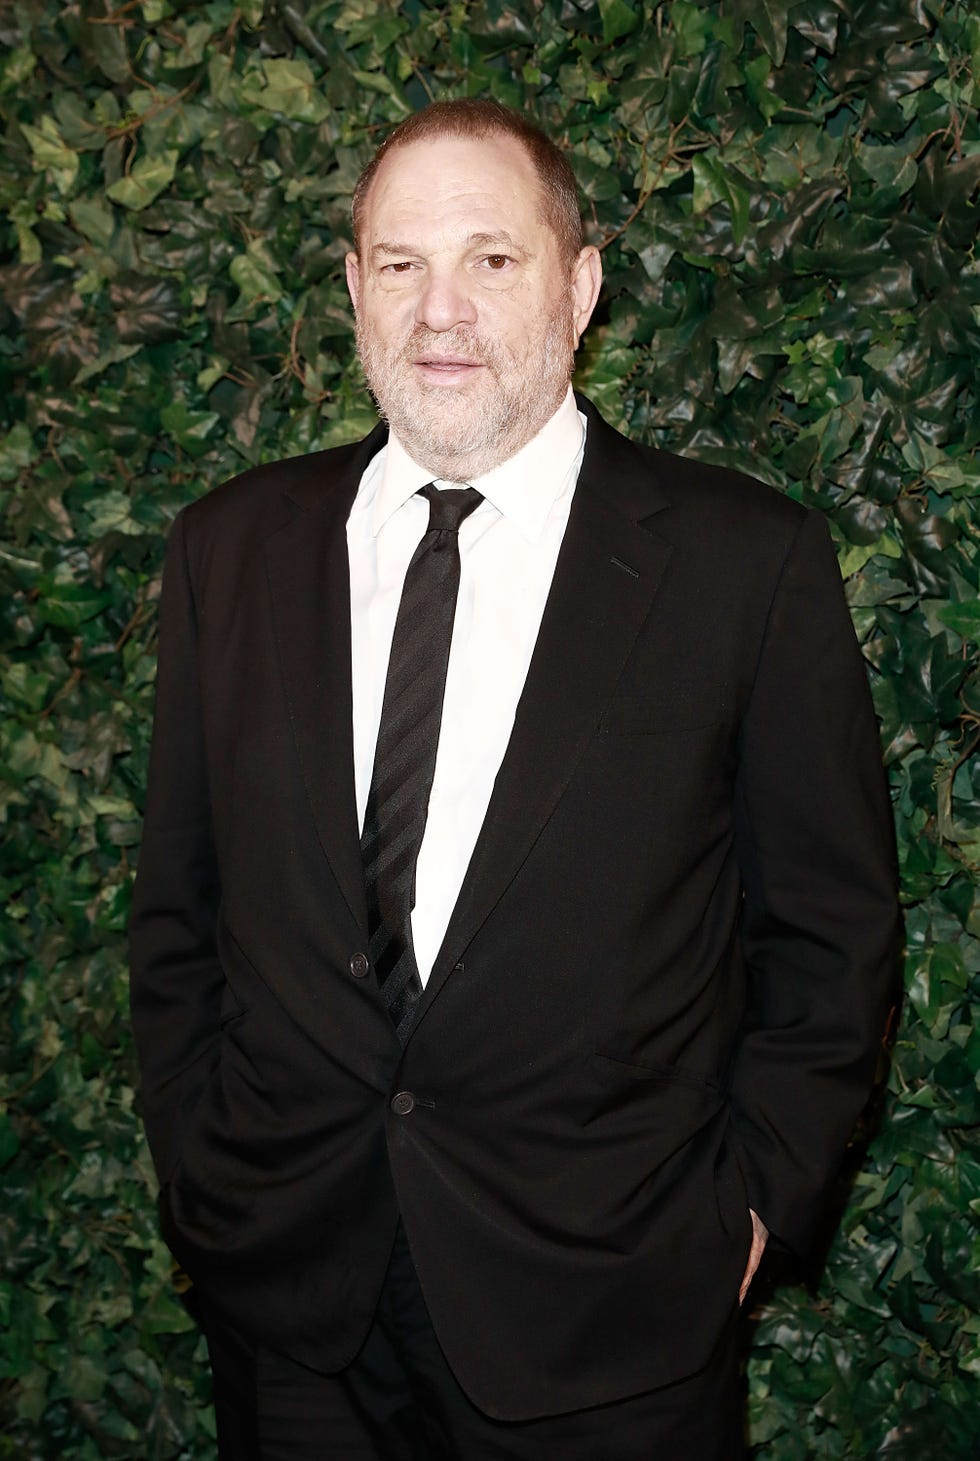 Harvey Weinstein To Turn Himself In To Face Sex Crime Charges In New York 1486